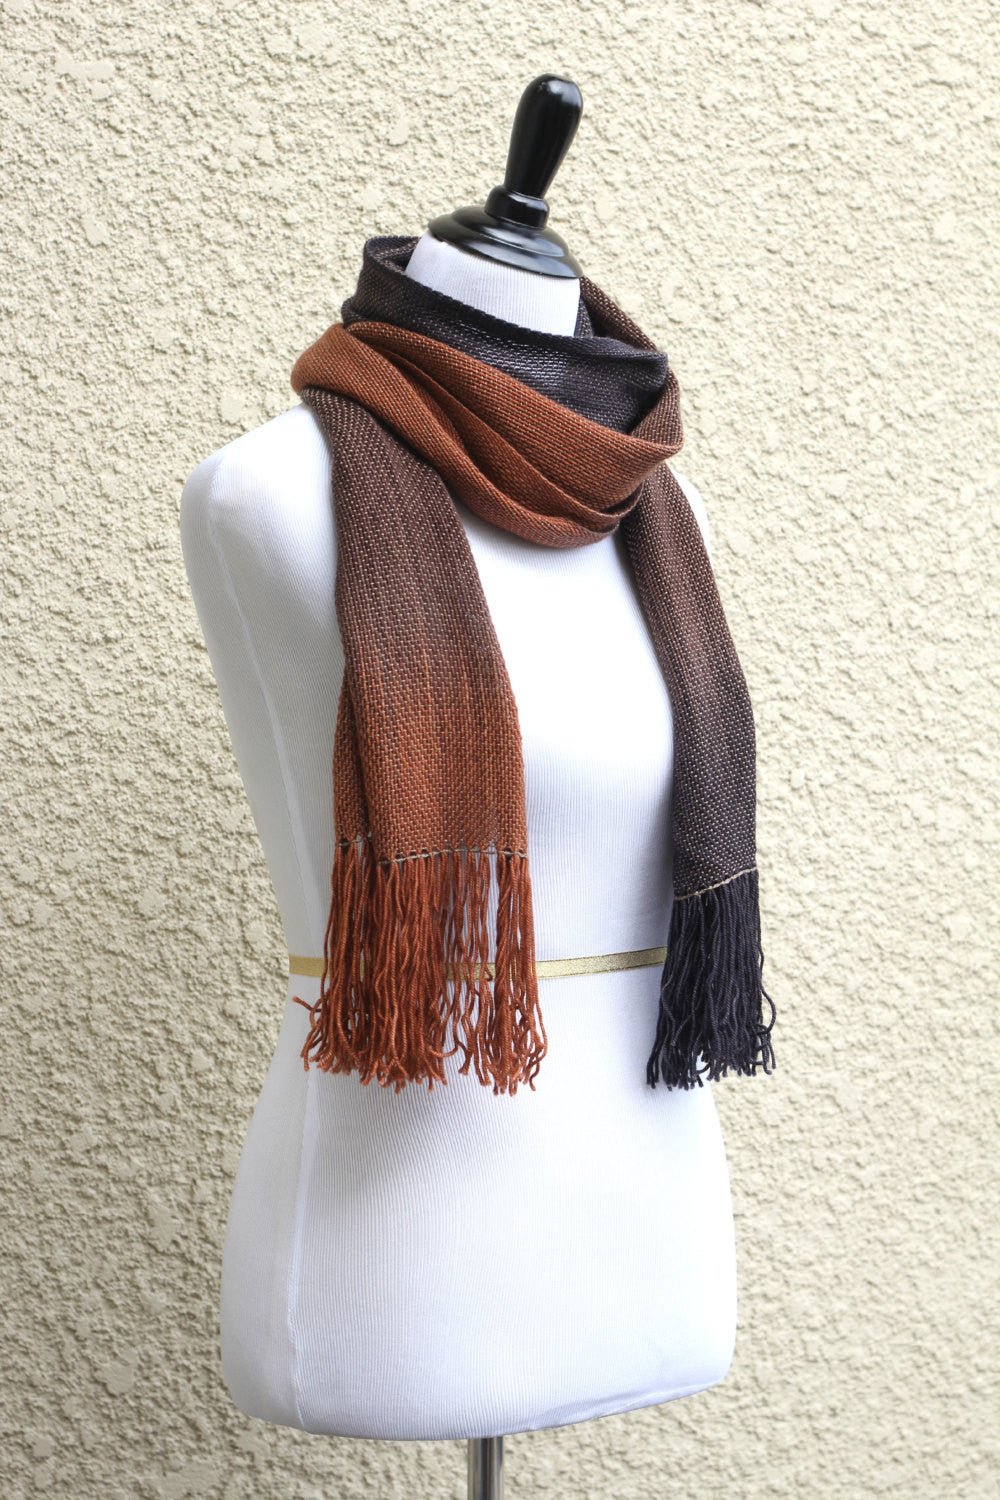 Woven scarf in brown coffee colors, gift for her